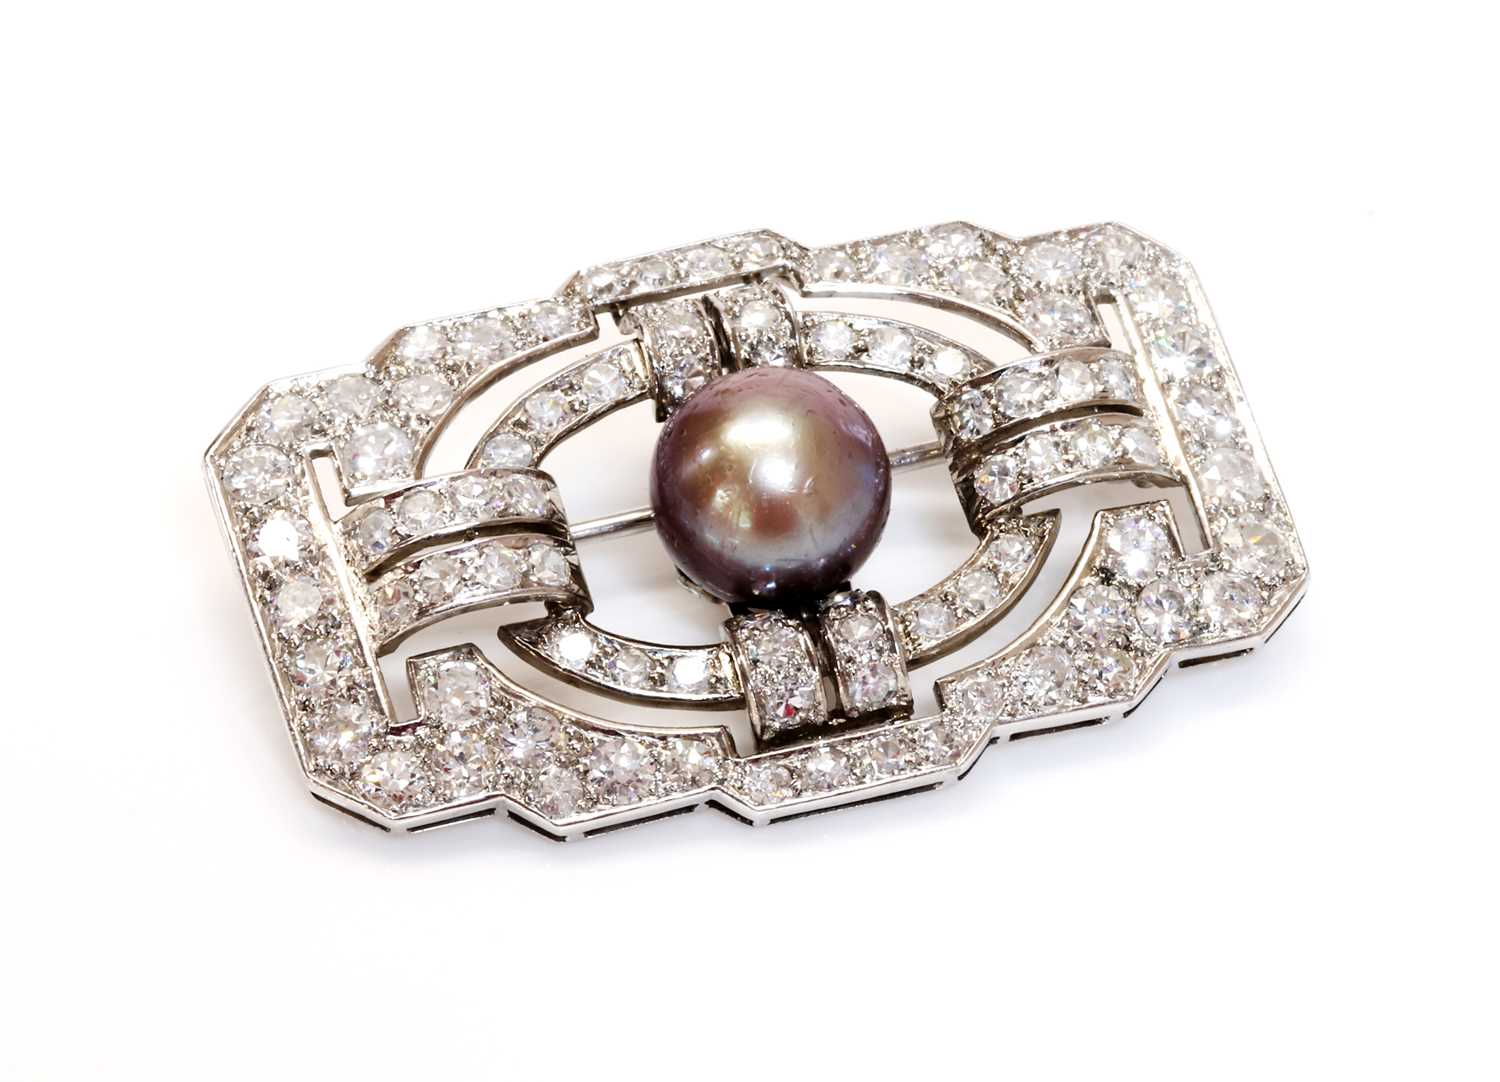 Lot 146 - A French Art Deco natural saltwater pearl diamond plaque brooch, c.1925